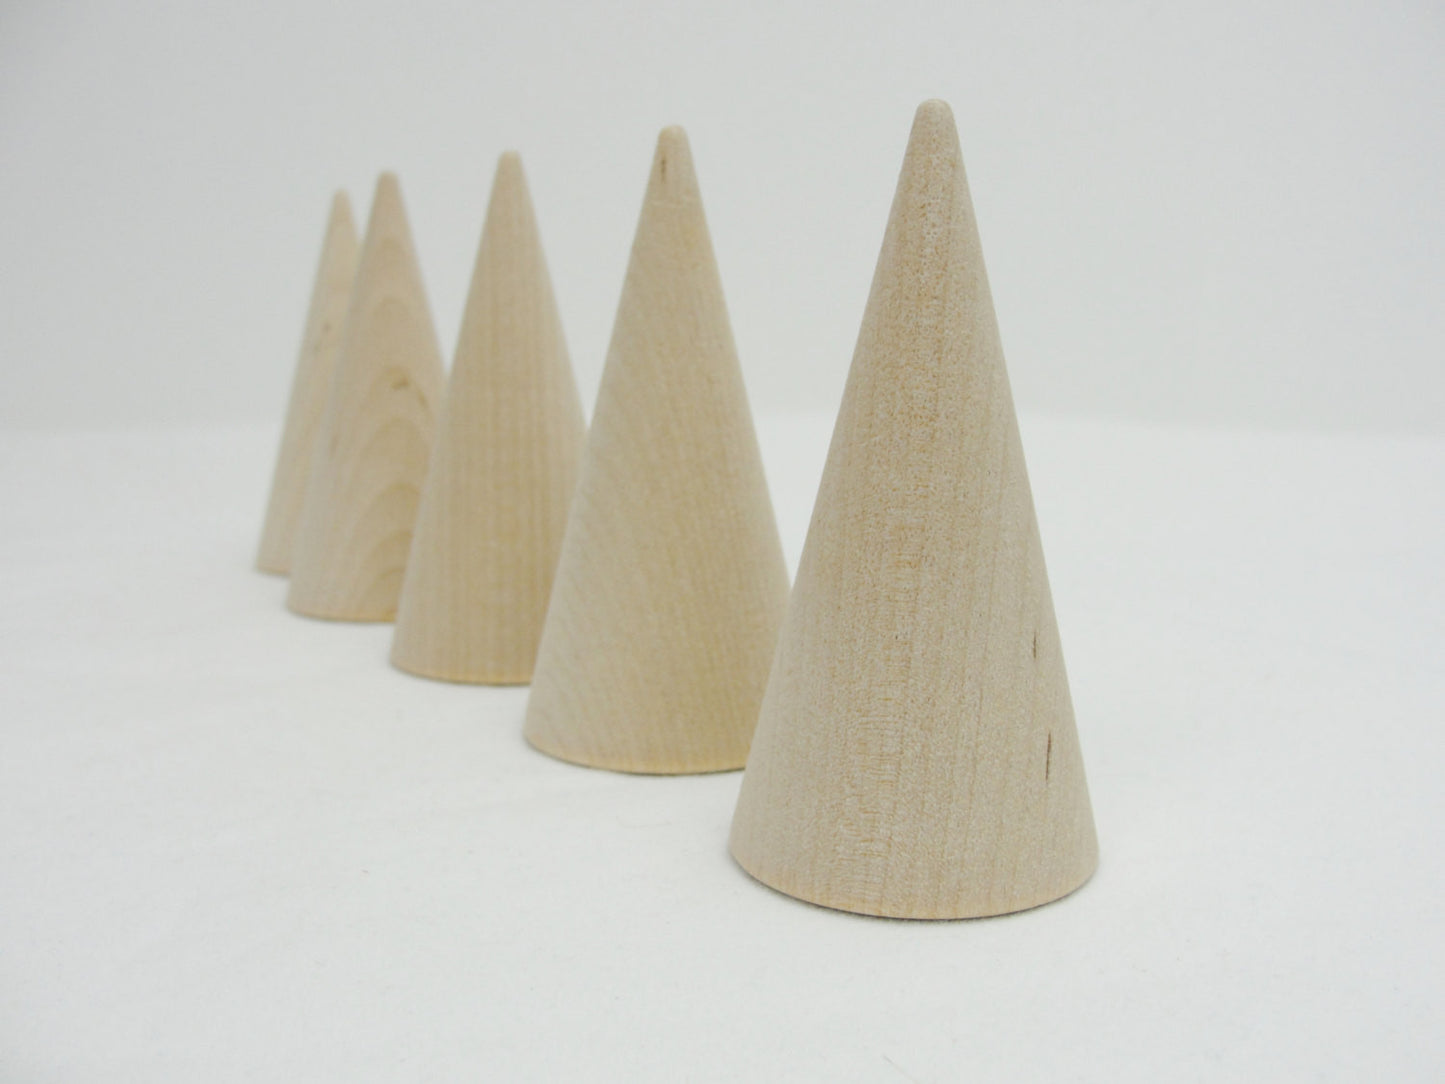 3" tall wooden cones, ring cones set of 5 - Wood parts - Craft Supply House